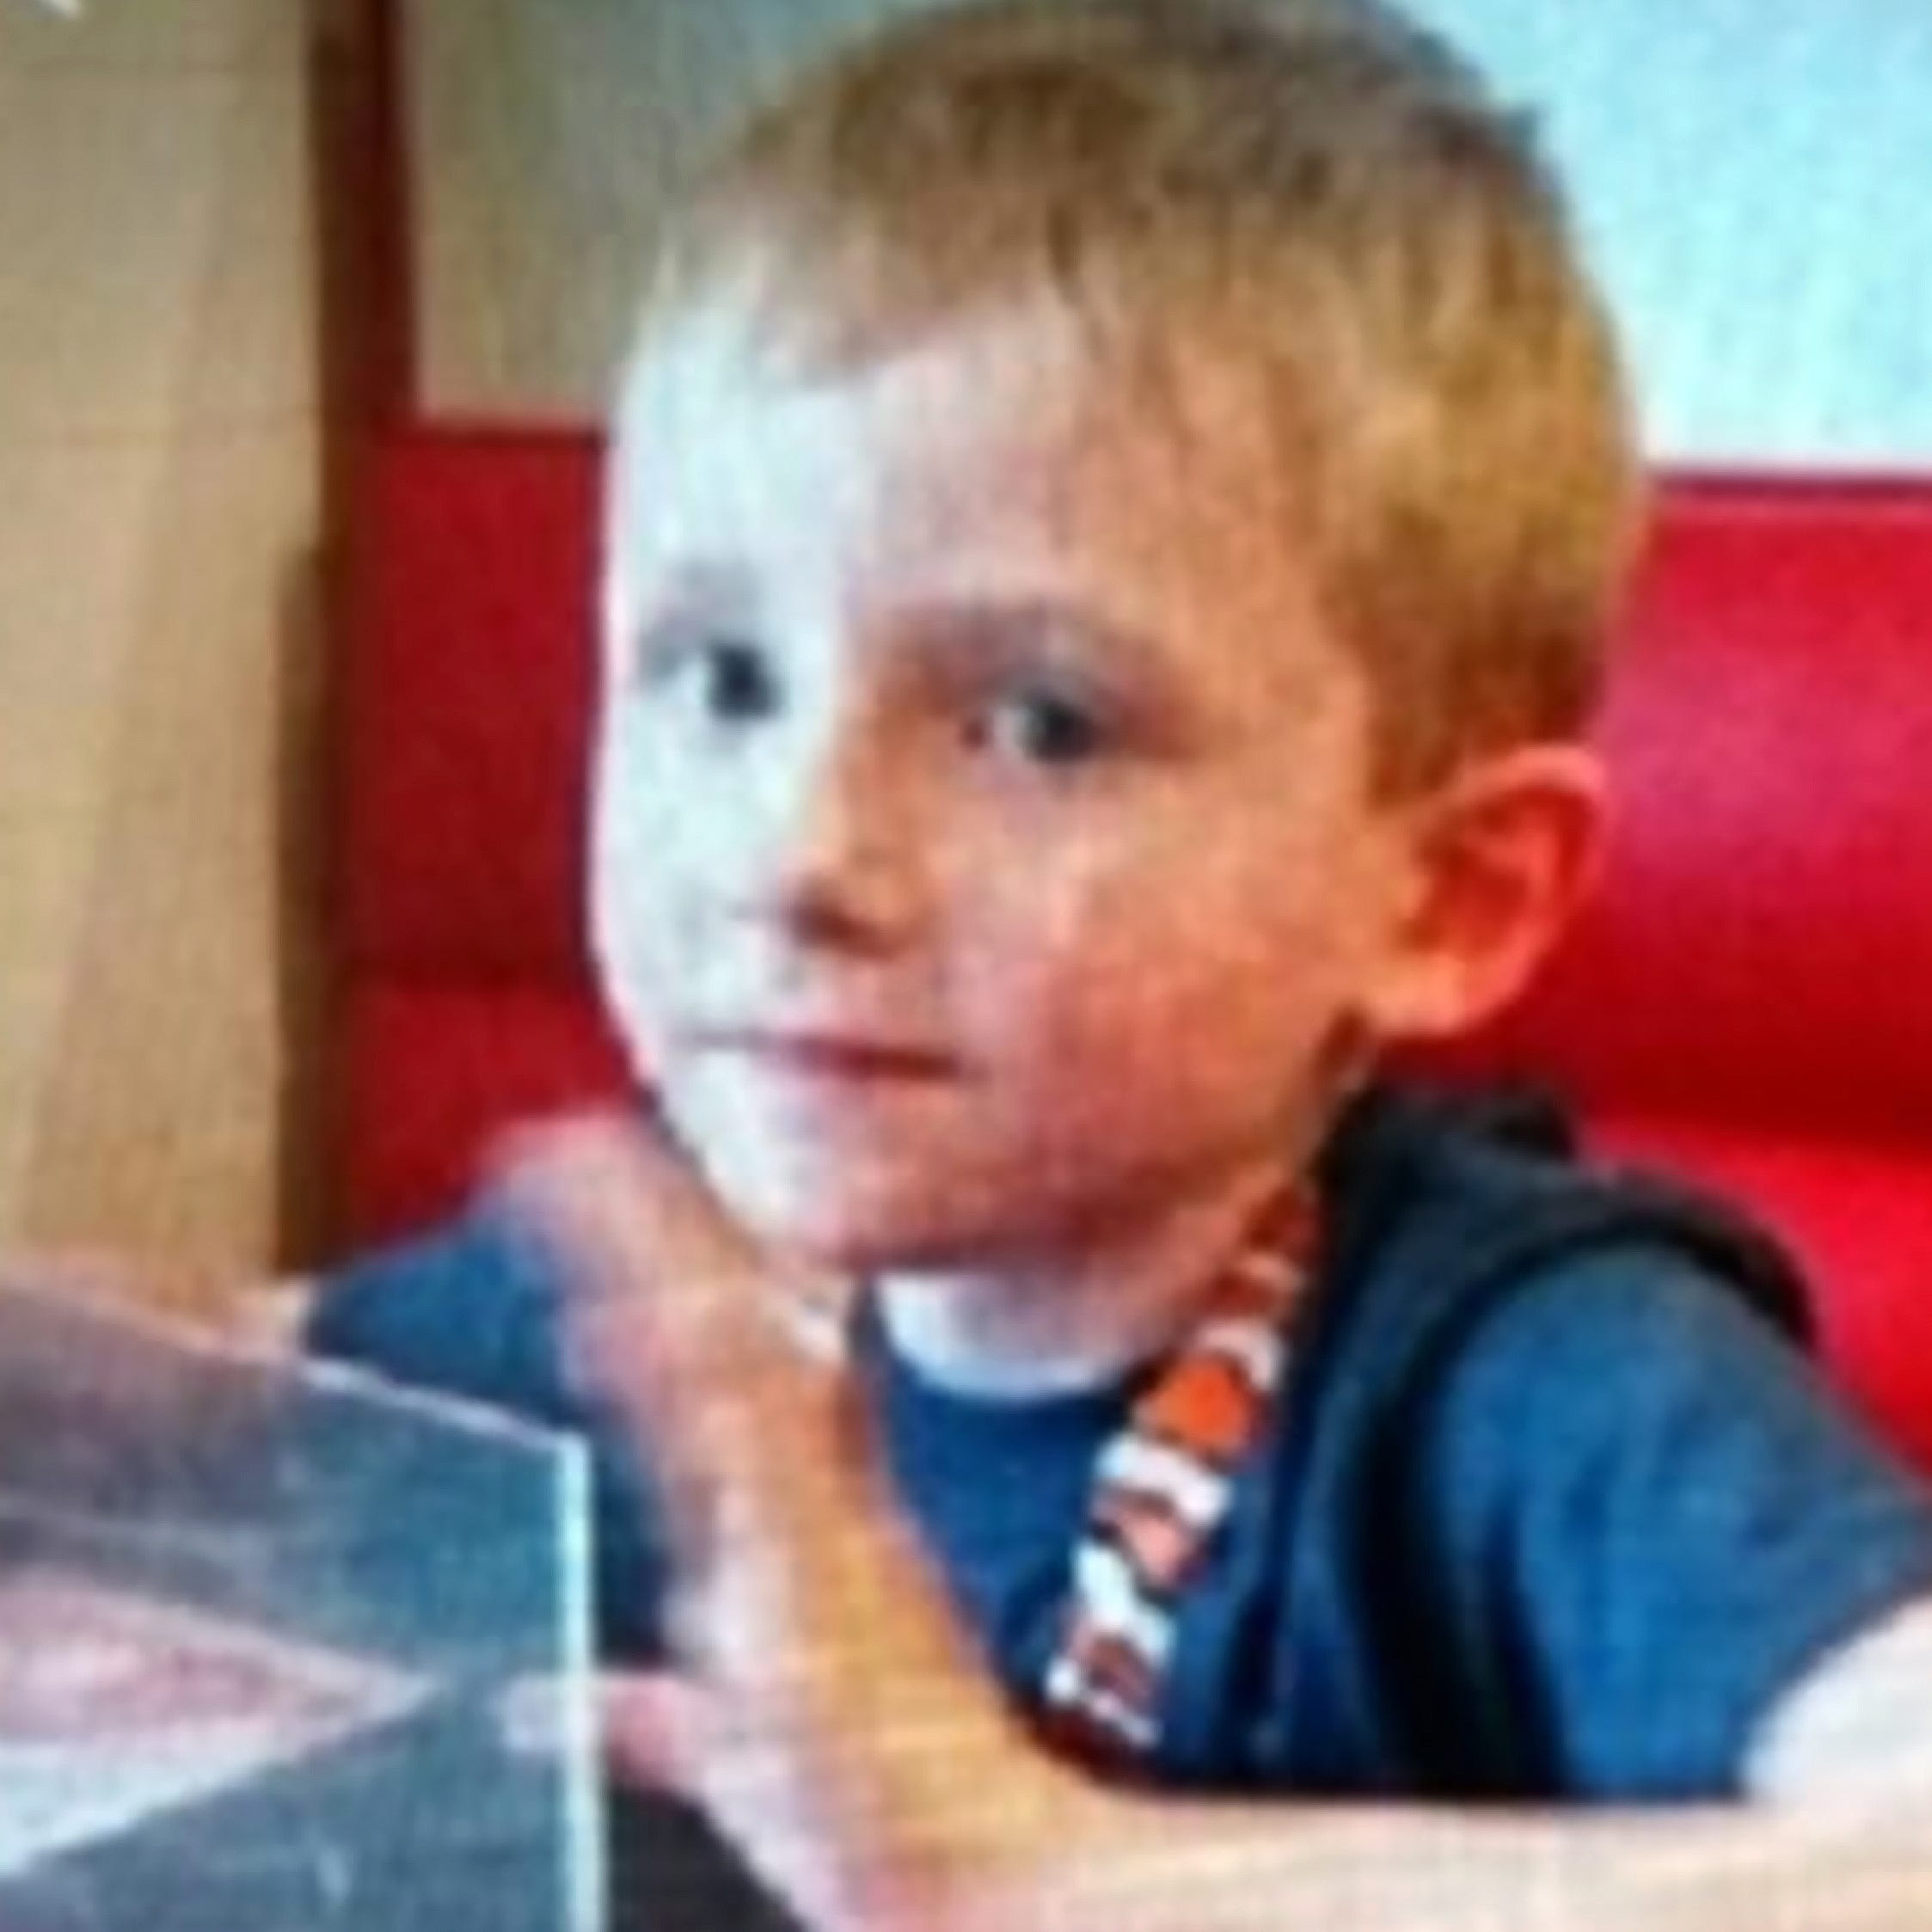 Maddox Ritch, 6, of Gastonia, North Carolina, was last seen Sept. 22, 2018, at Rankin Lake Park in Gastonia. Police believe they found his body Sept. 27.